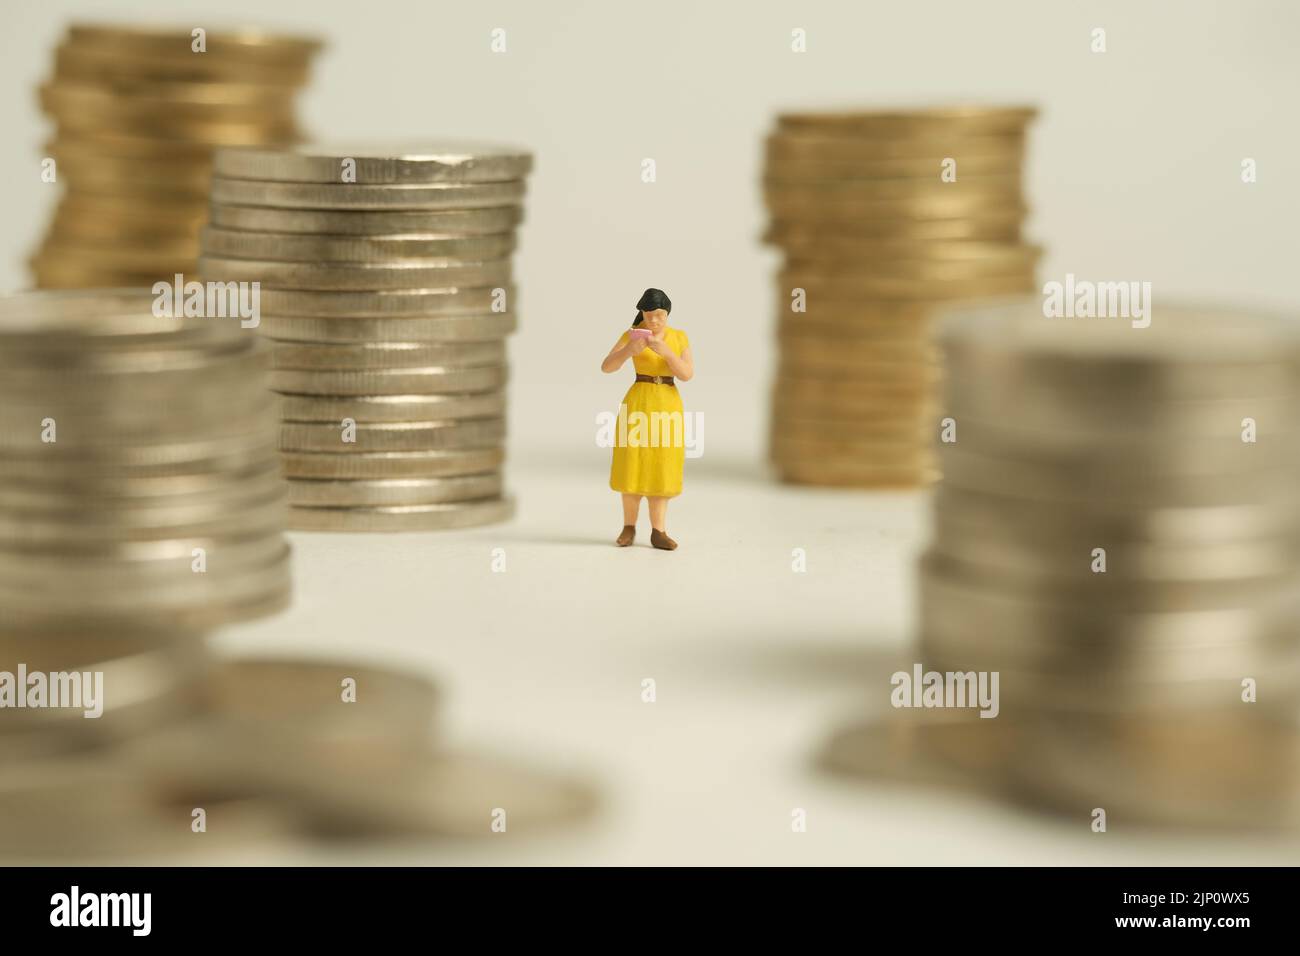 Miniature people toy figure photography. A men student standing the middle of money coin stack, isolated on white background. Image photo Stock Photo